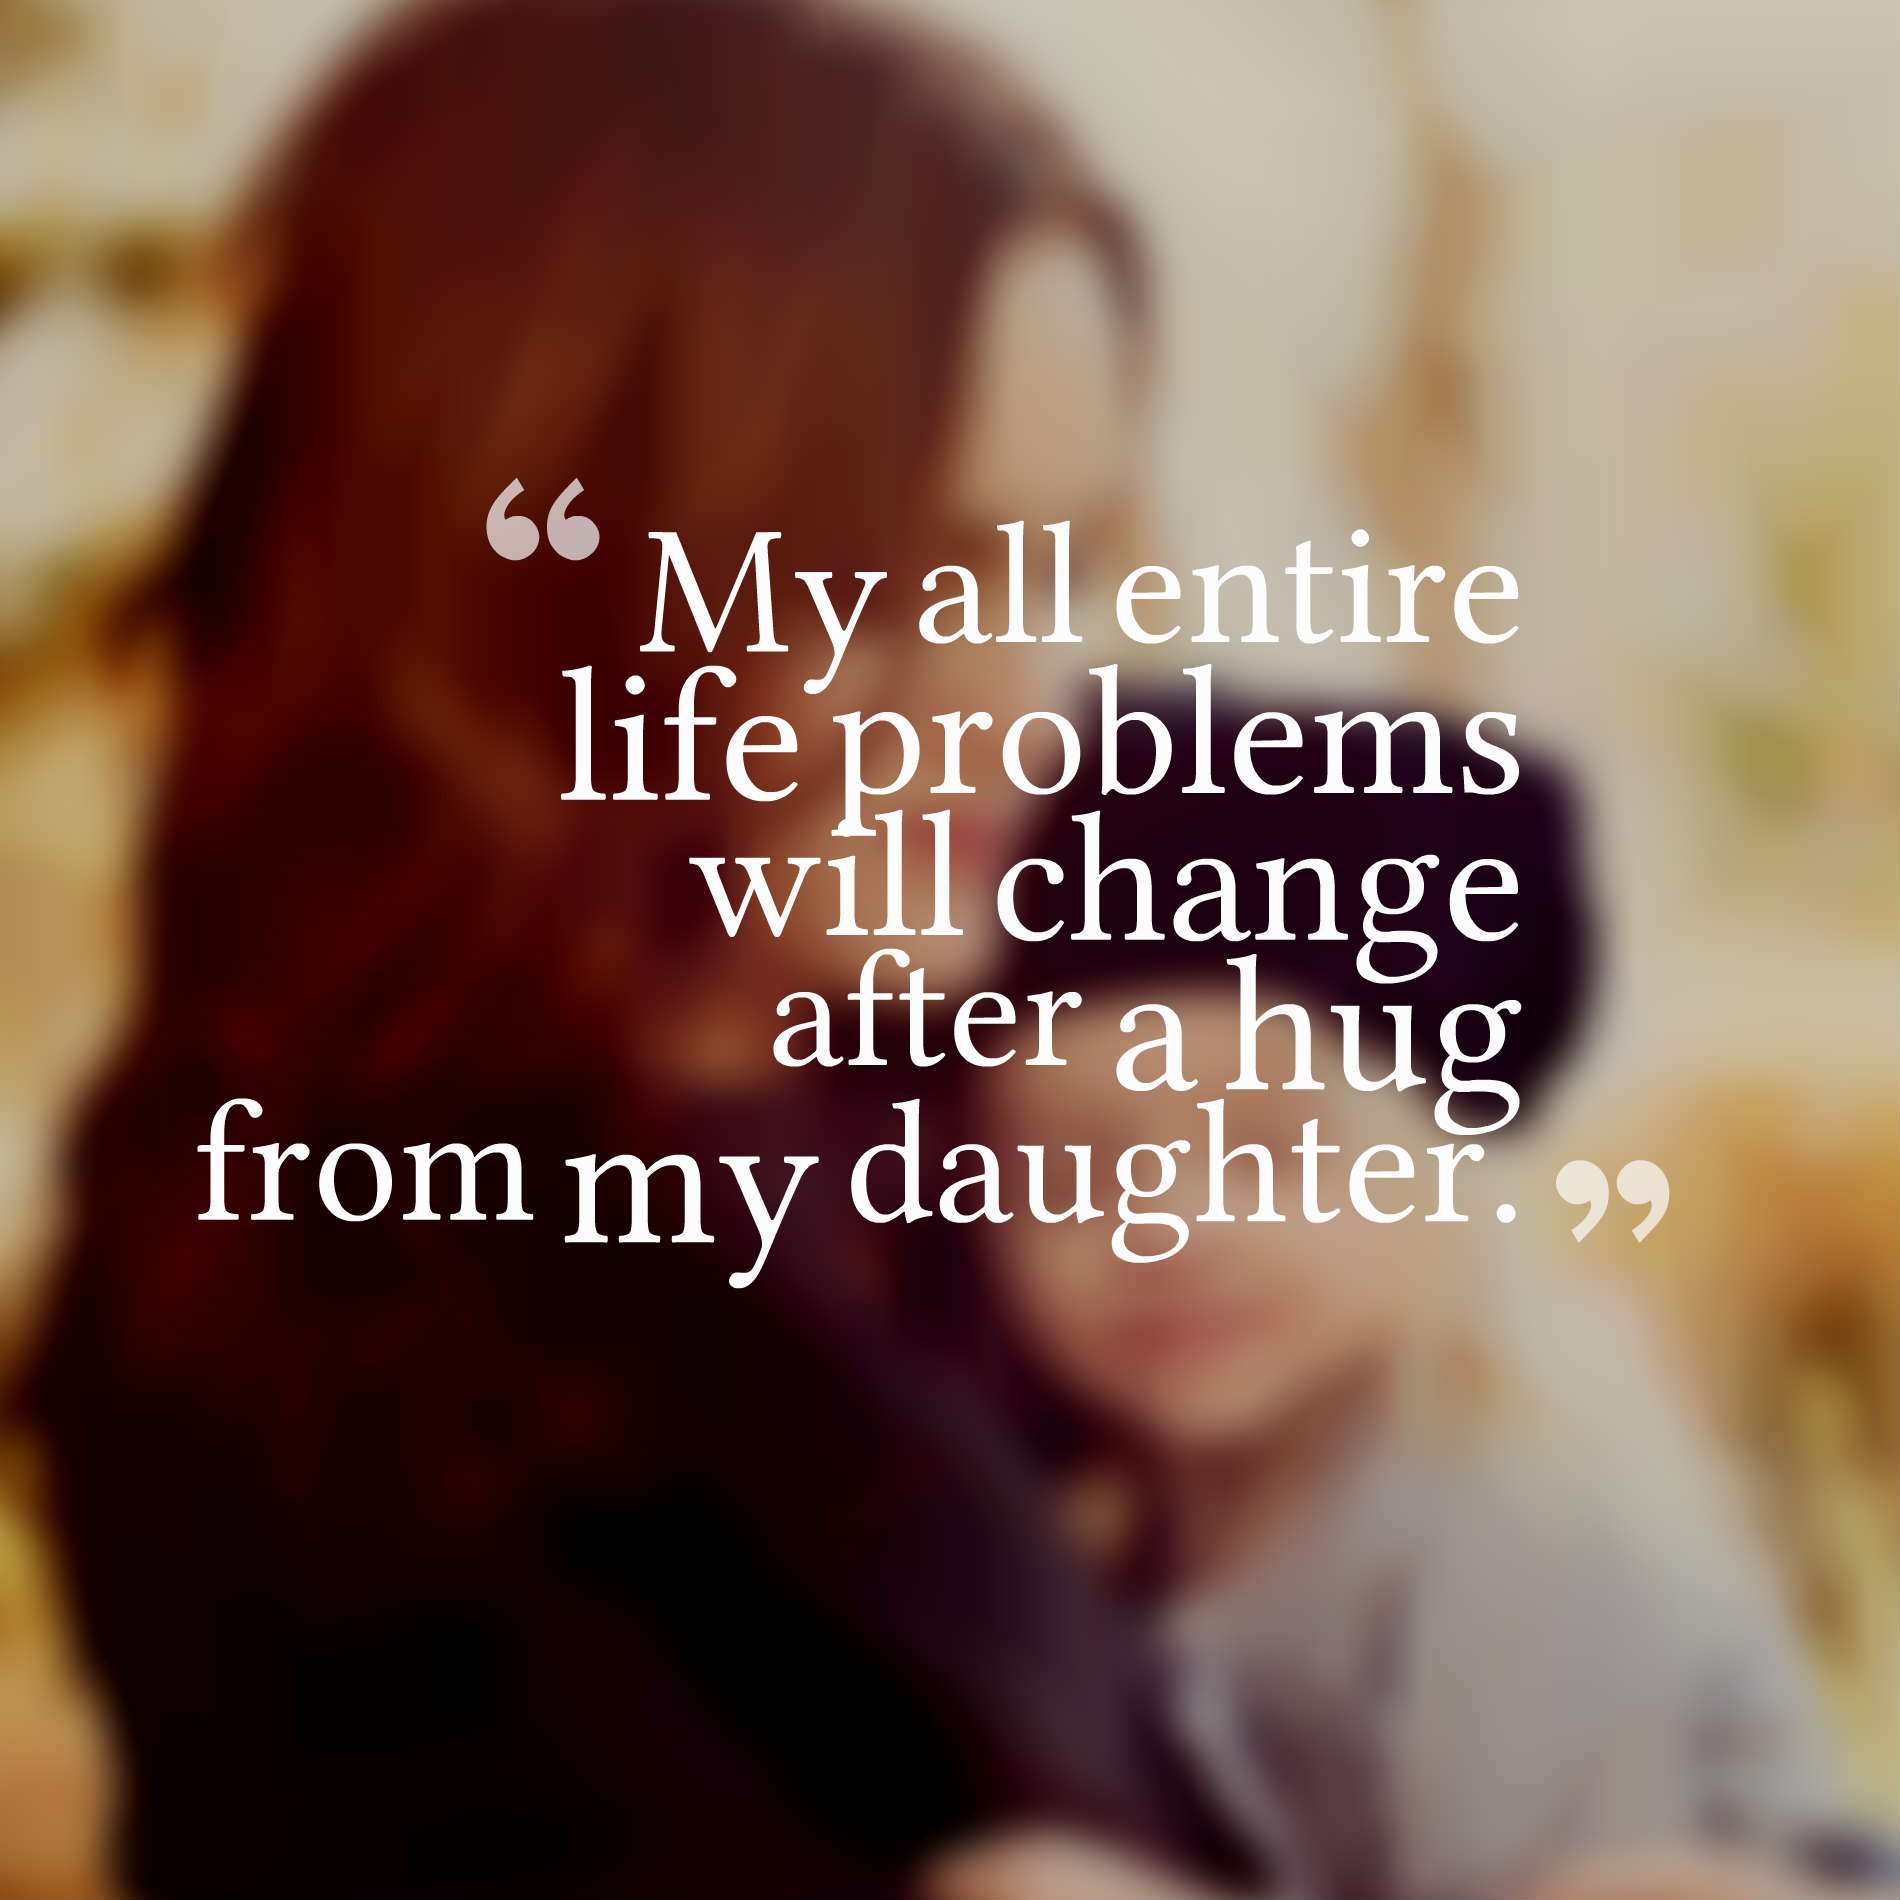 My all entire life problems will change after a hug from my daughter.